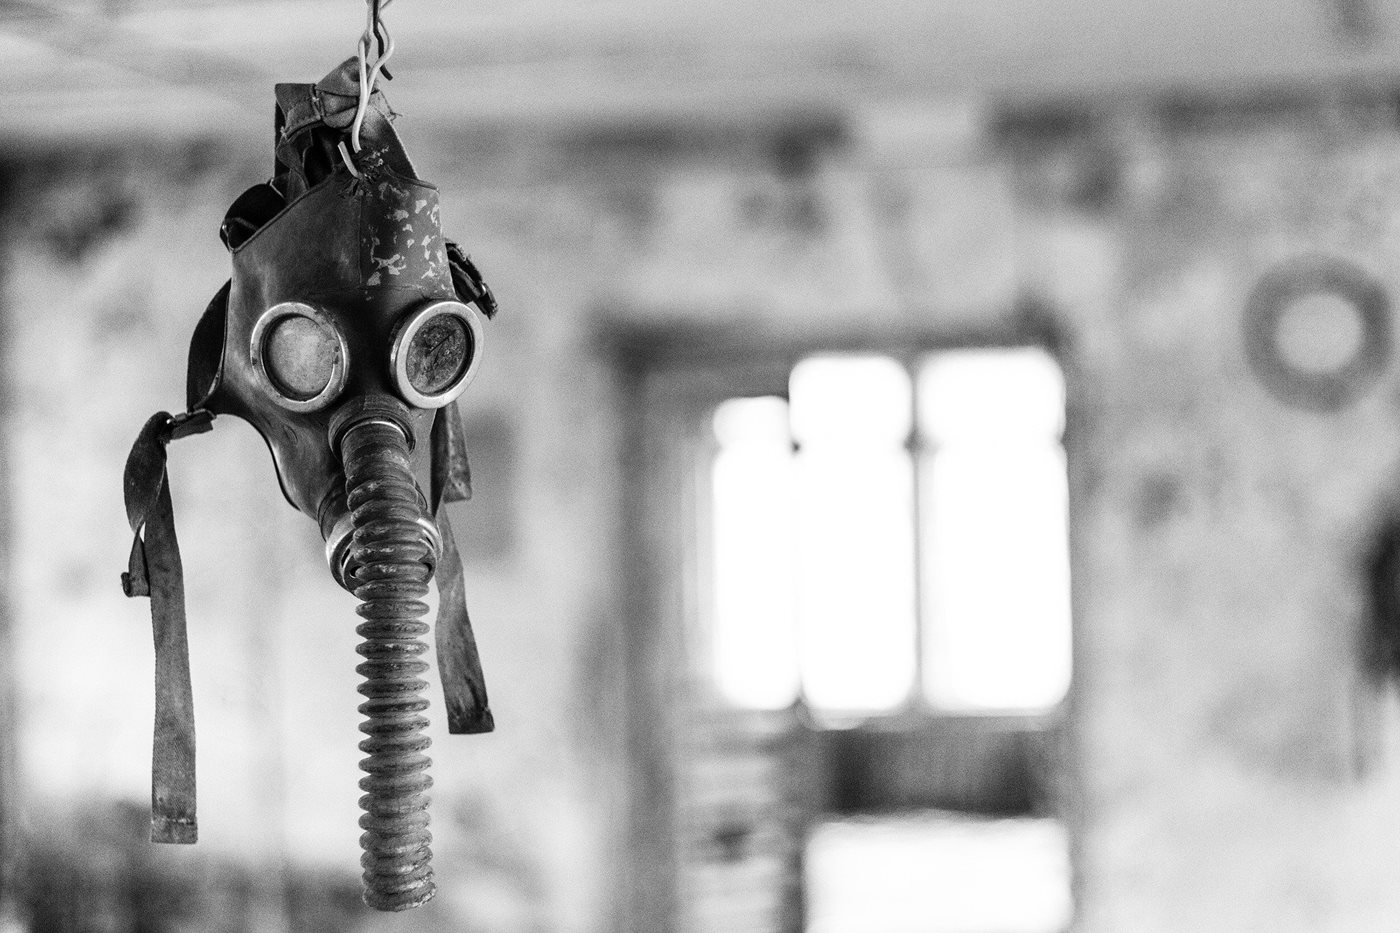 Life Finds Its Way on Chernobyl teaser image